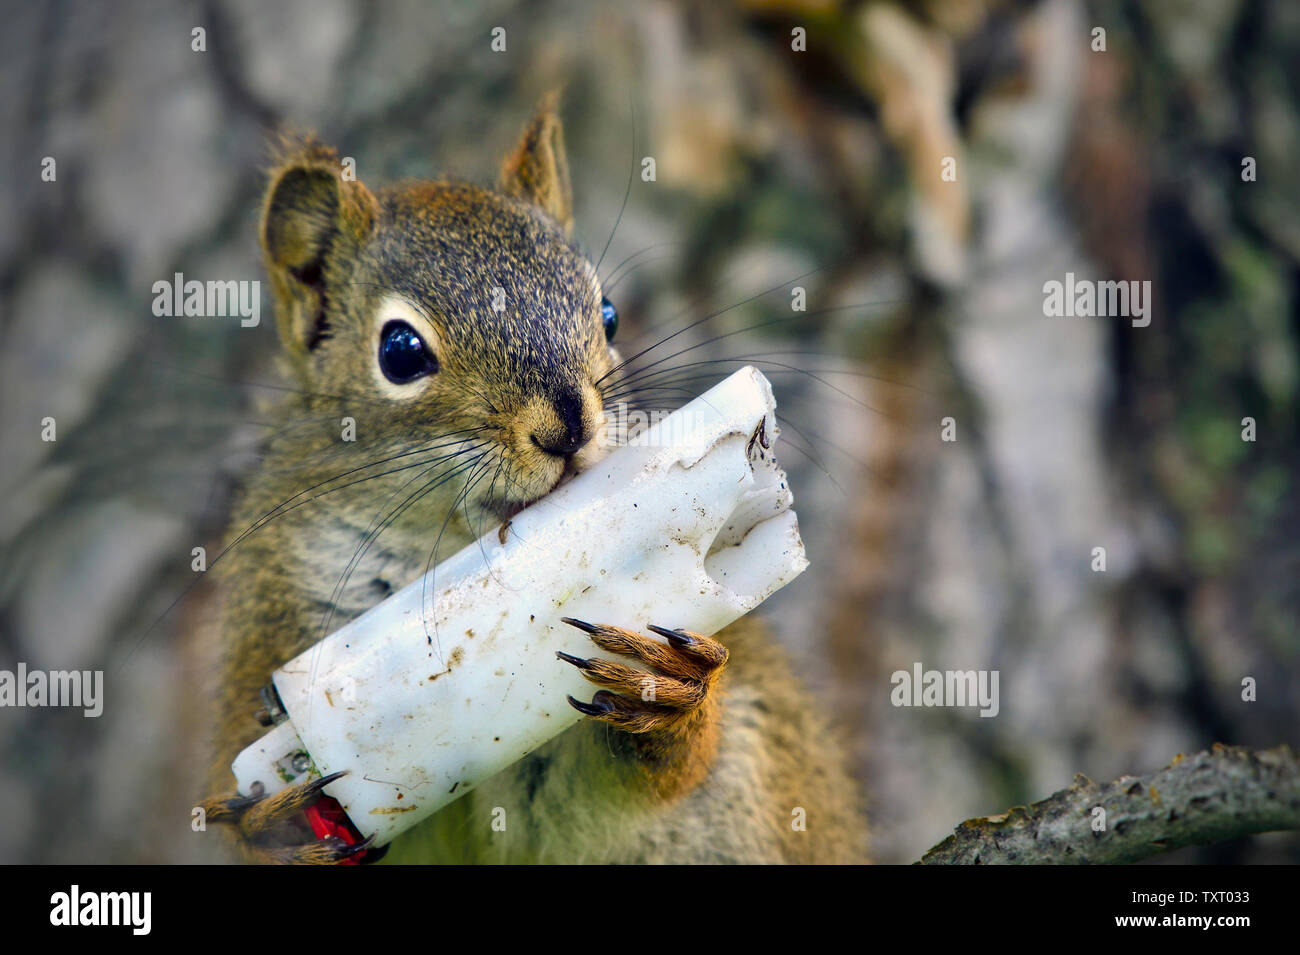 A red squirrel 'Tamiasciurus hudsonicus', holding a disposable lighter that has been discarded in his wild habitat Stock Photo